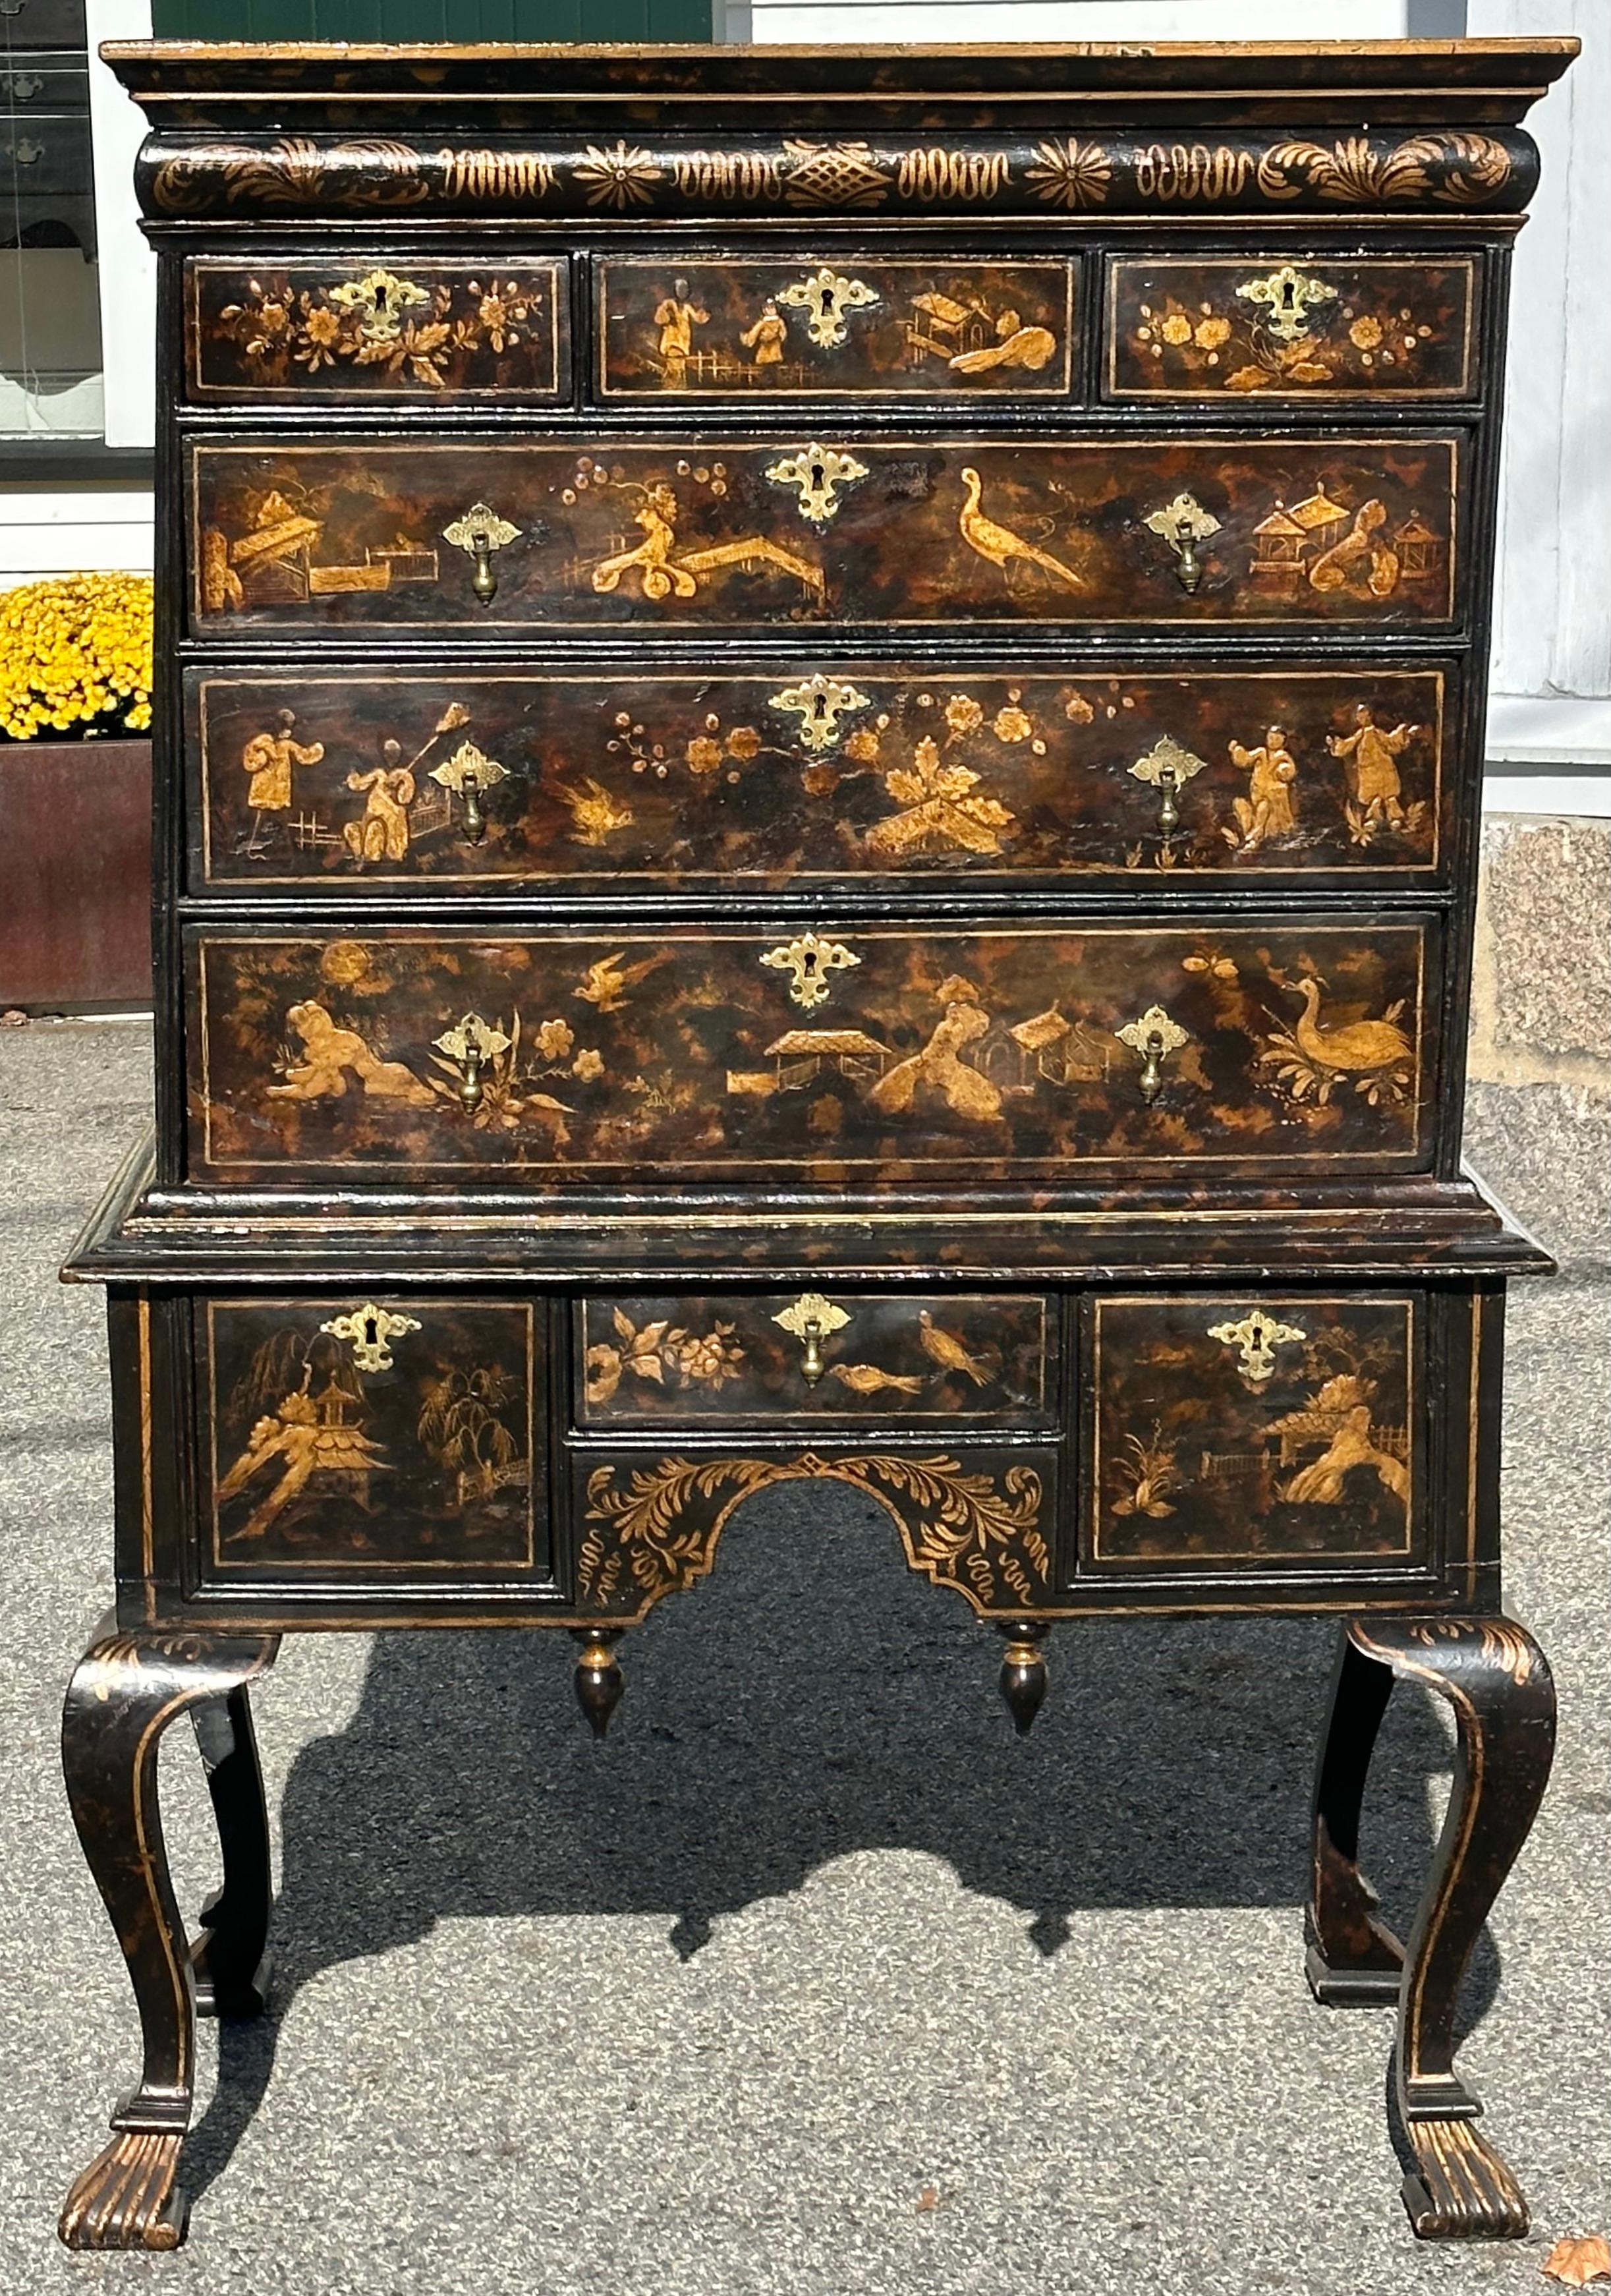 Fine English George I or Queen Anne Black Lacquered Chinoiserie Chest on Stand.  Original Chinoise Design with figures, exotic birds, temples and architecture.  Great patina and retention of its primary faux tortoise shell paint.  Multiple drawers